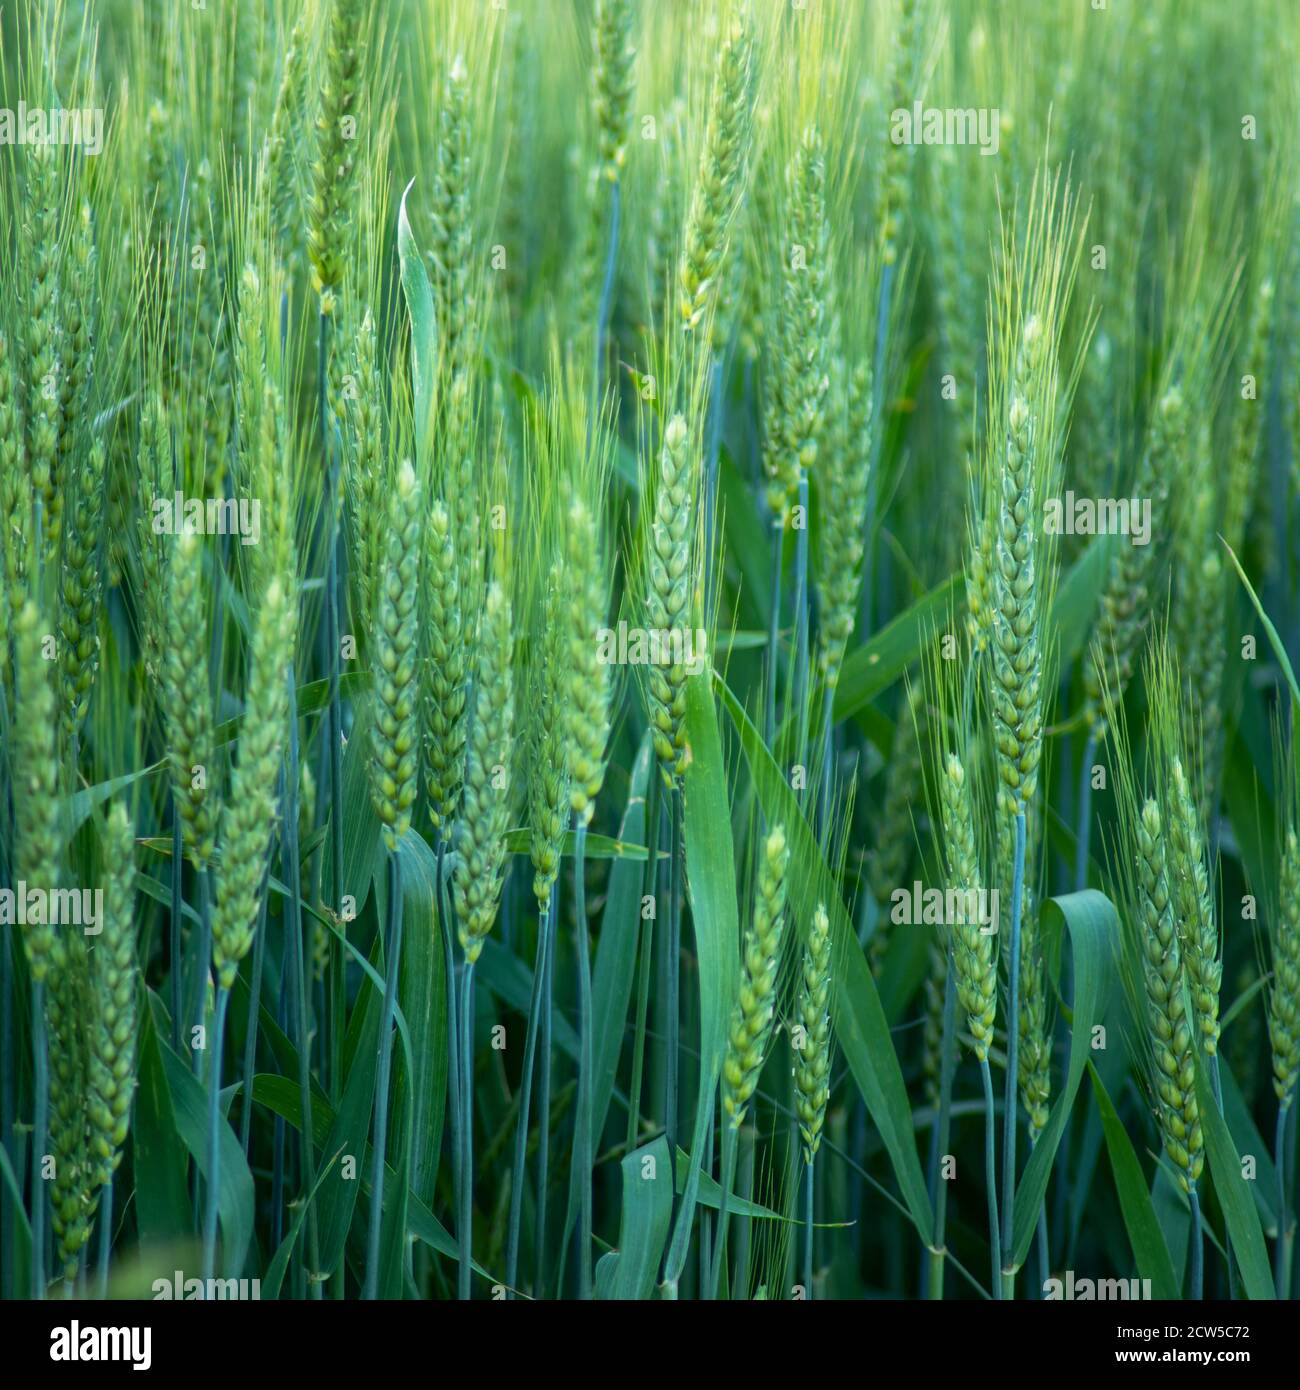 Close up image of blue stem wheat blowing in the breeze on a Pennsylvania country road. Mesmerizing patterns, color interest and texture. Stock Photo